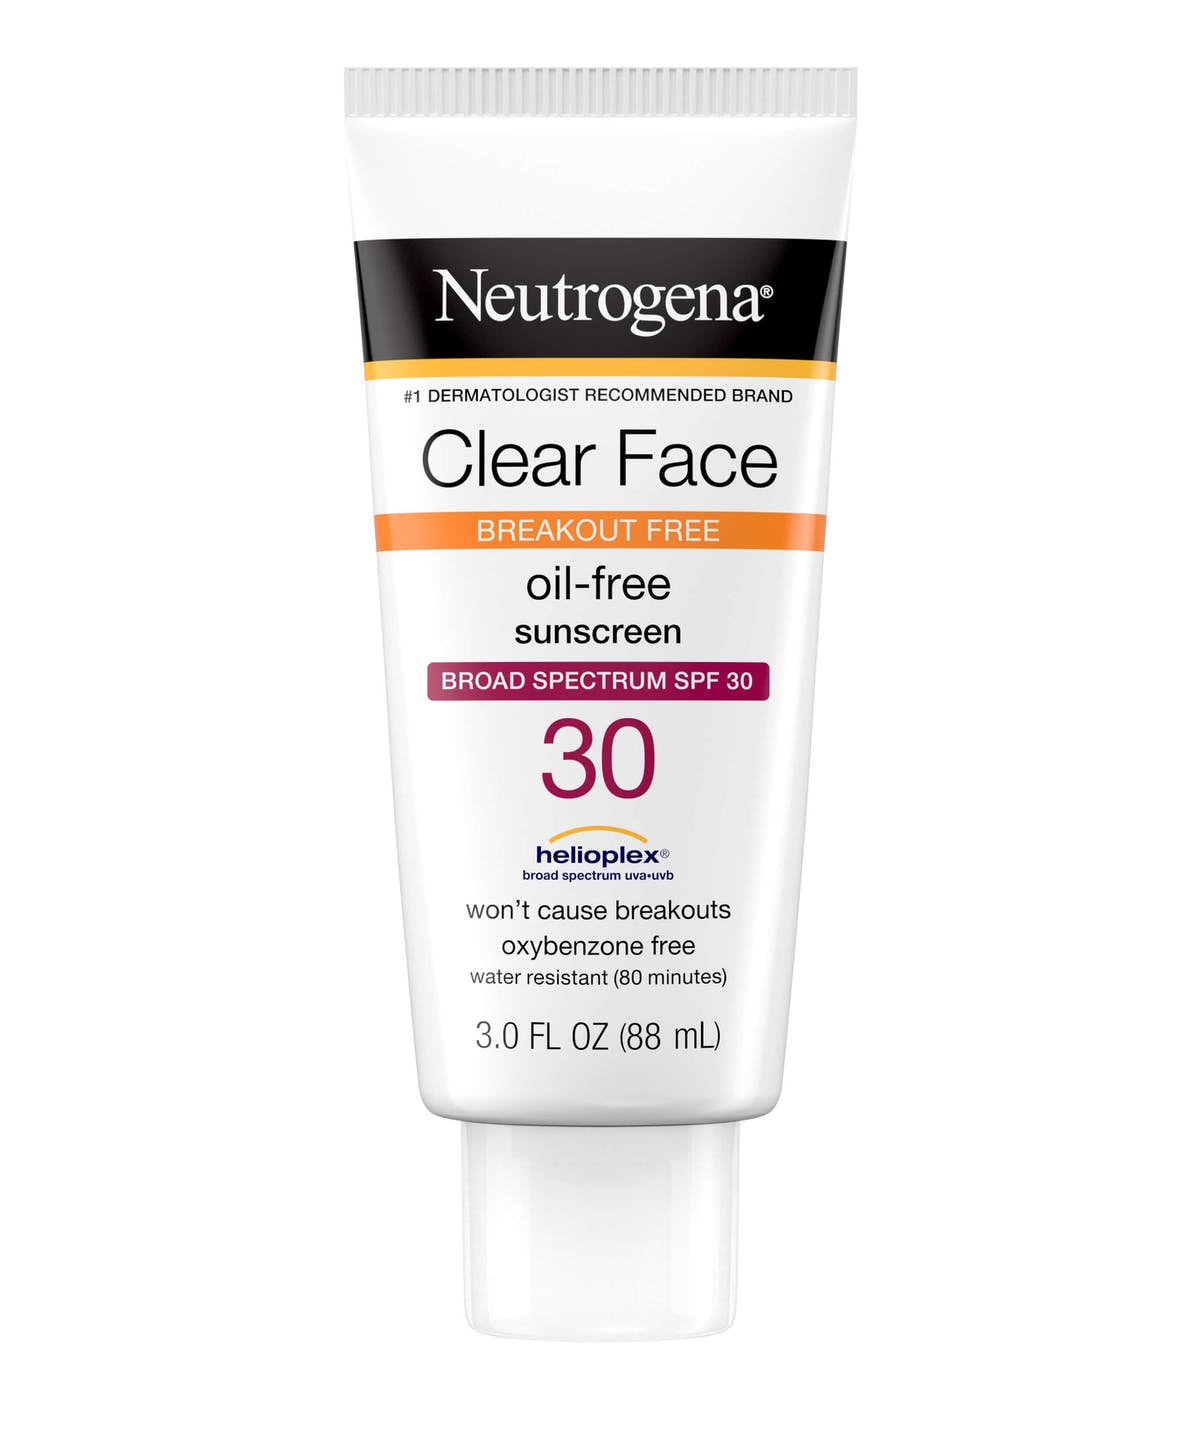 Buy  Neutrogena Clear Face Oil-Free Sunscreen SPF 30 in PakiMSan at beMS price. 